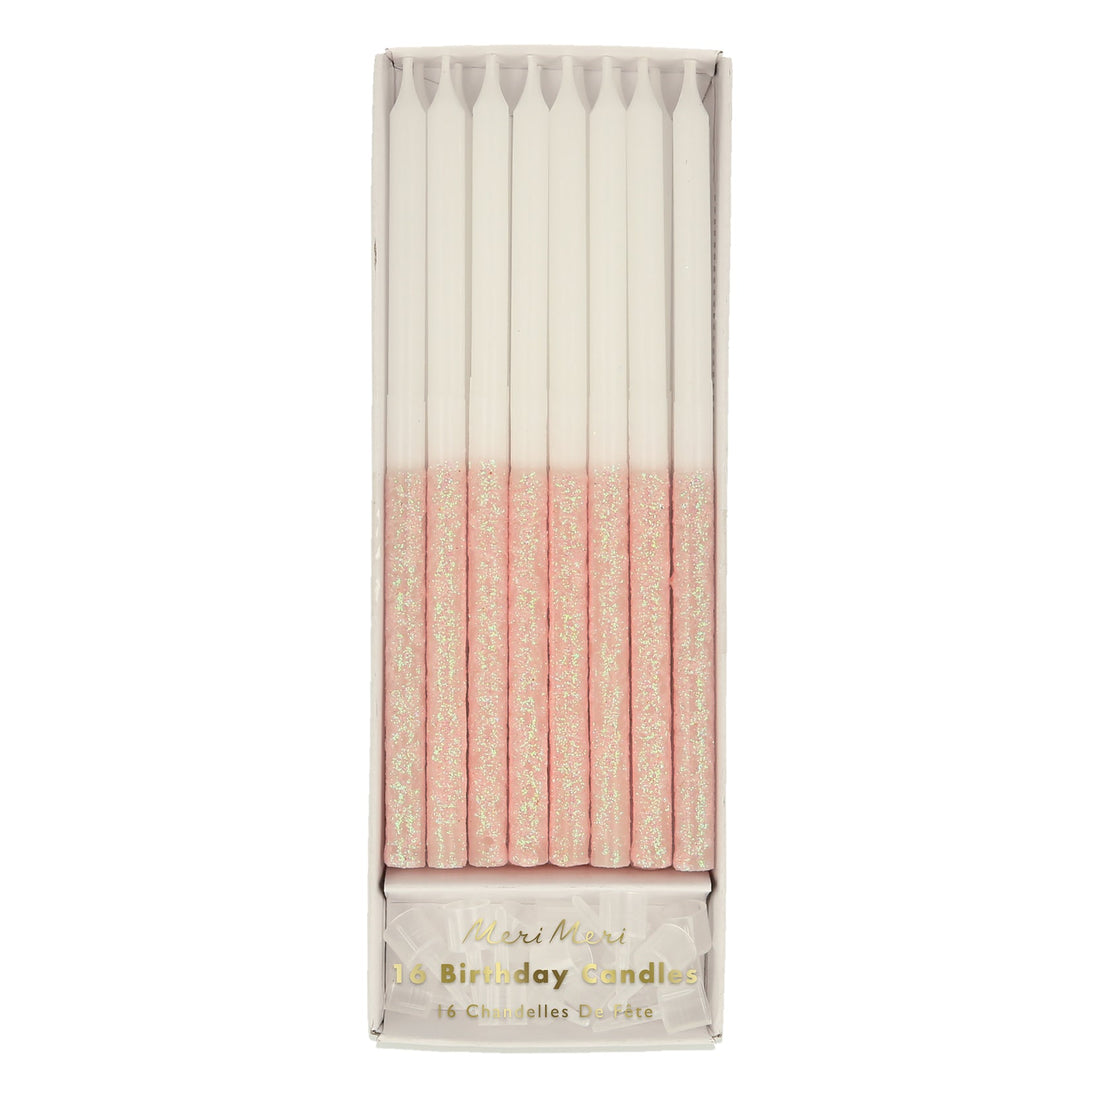 A pack of 16 Pale Pink Glitter Dipped Candles by Meri Meri.